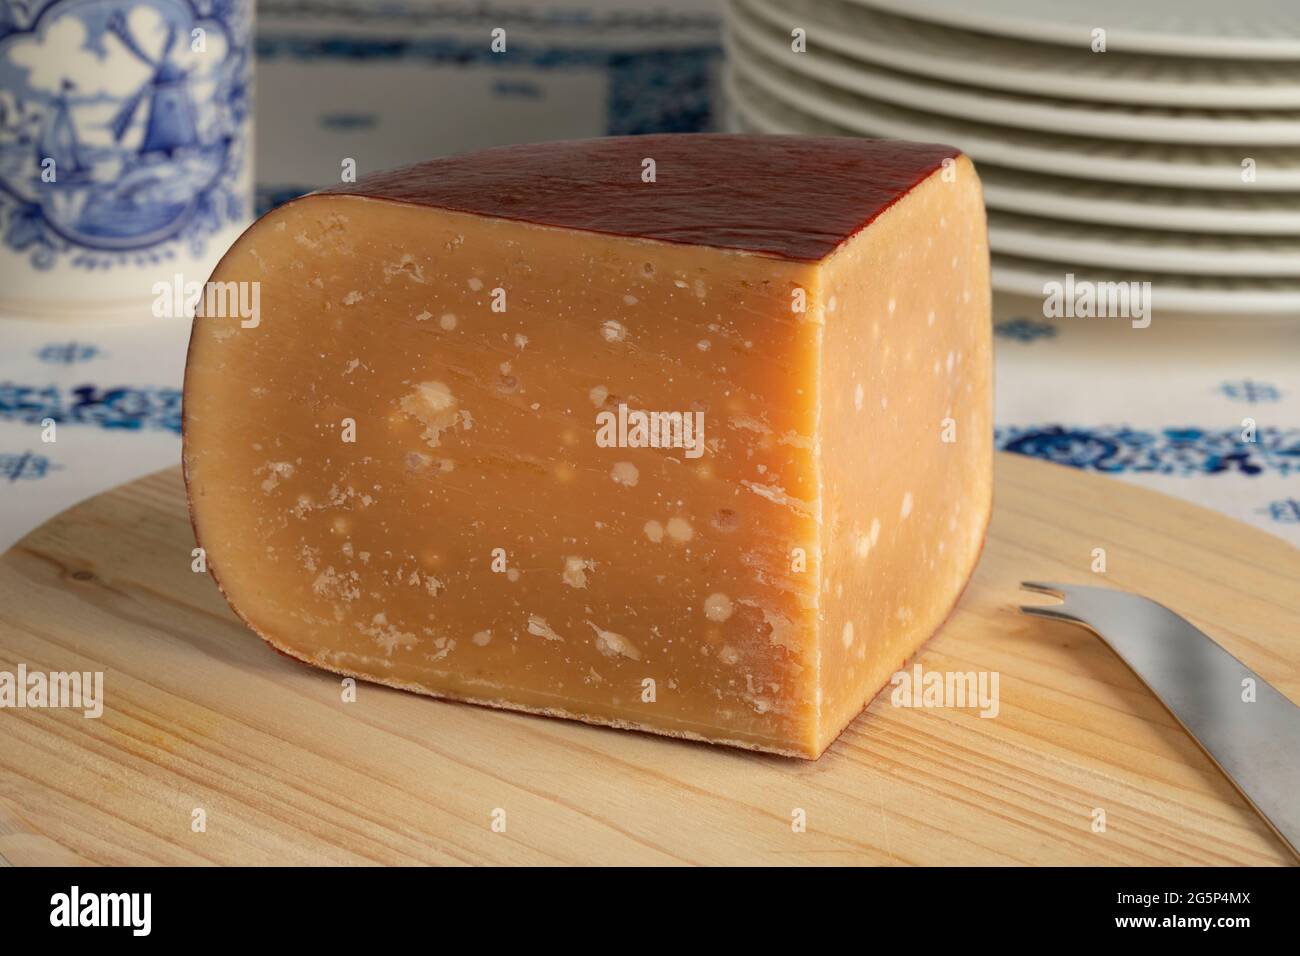 Wedge of old mature Dutch sheep milk cheese on a cutting board Stock Photo